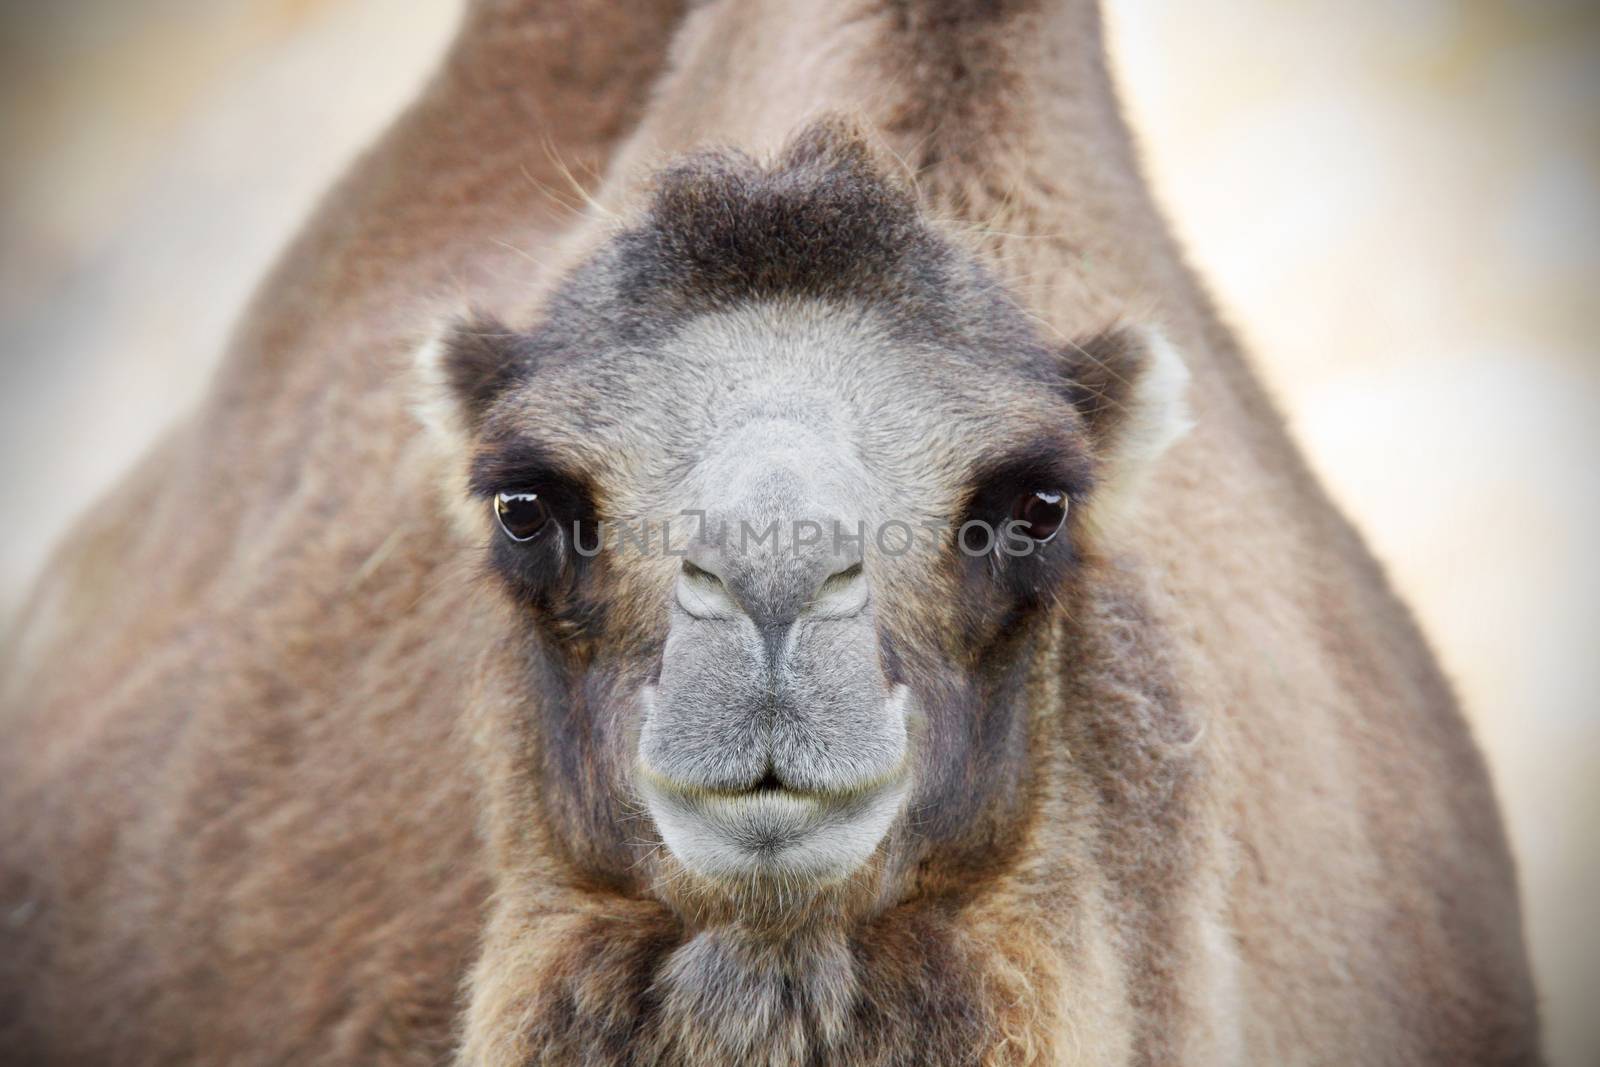 Portrait of a Bactrian camel, Camelus bactrianus, looking at camera